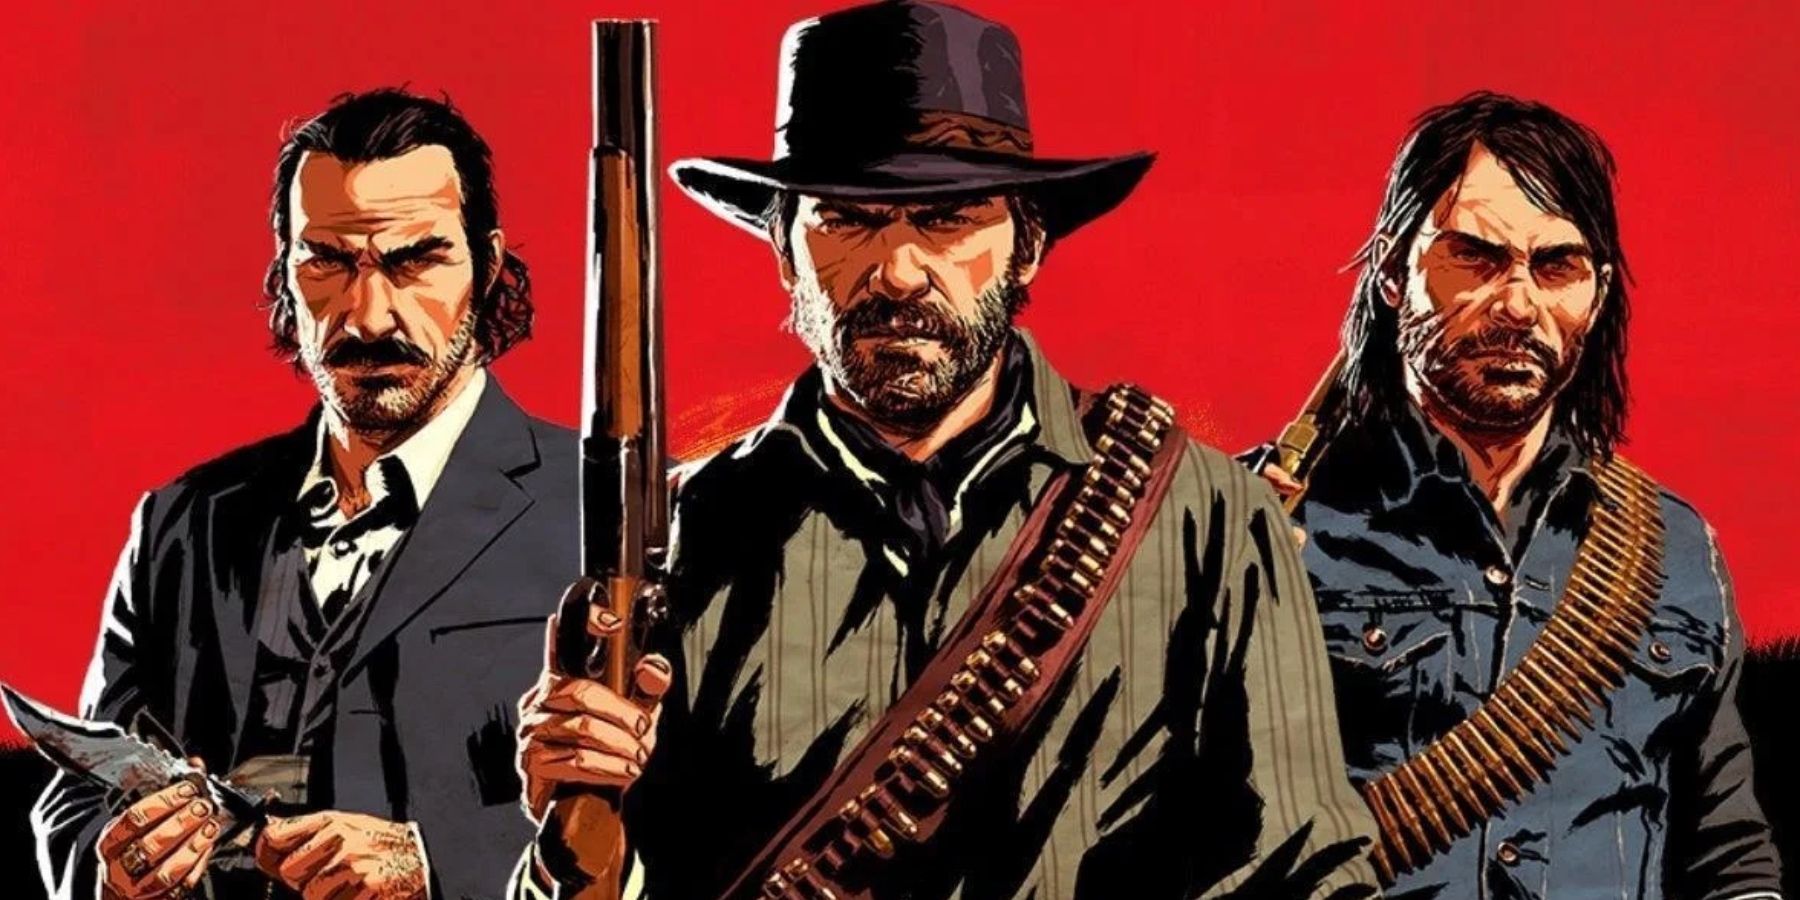 Red dead redemption на ps5. Red Dead Redemption 2010. Red Dead Redemption 1. Red Dead Redemption 1 Remastered. Ремастера Red Dead Redemption,.